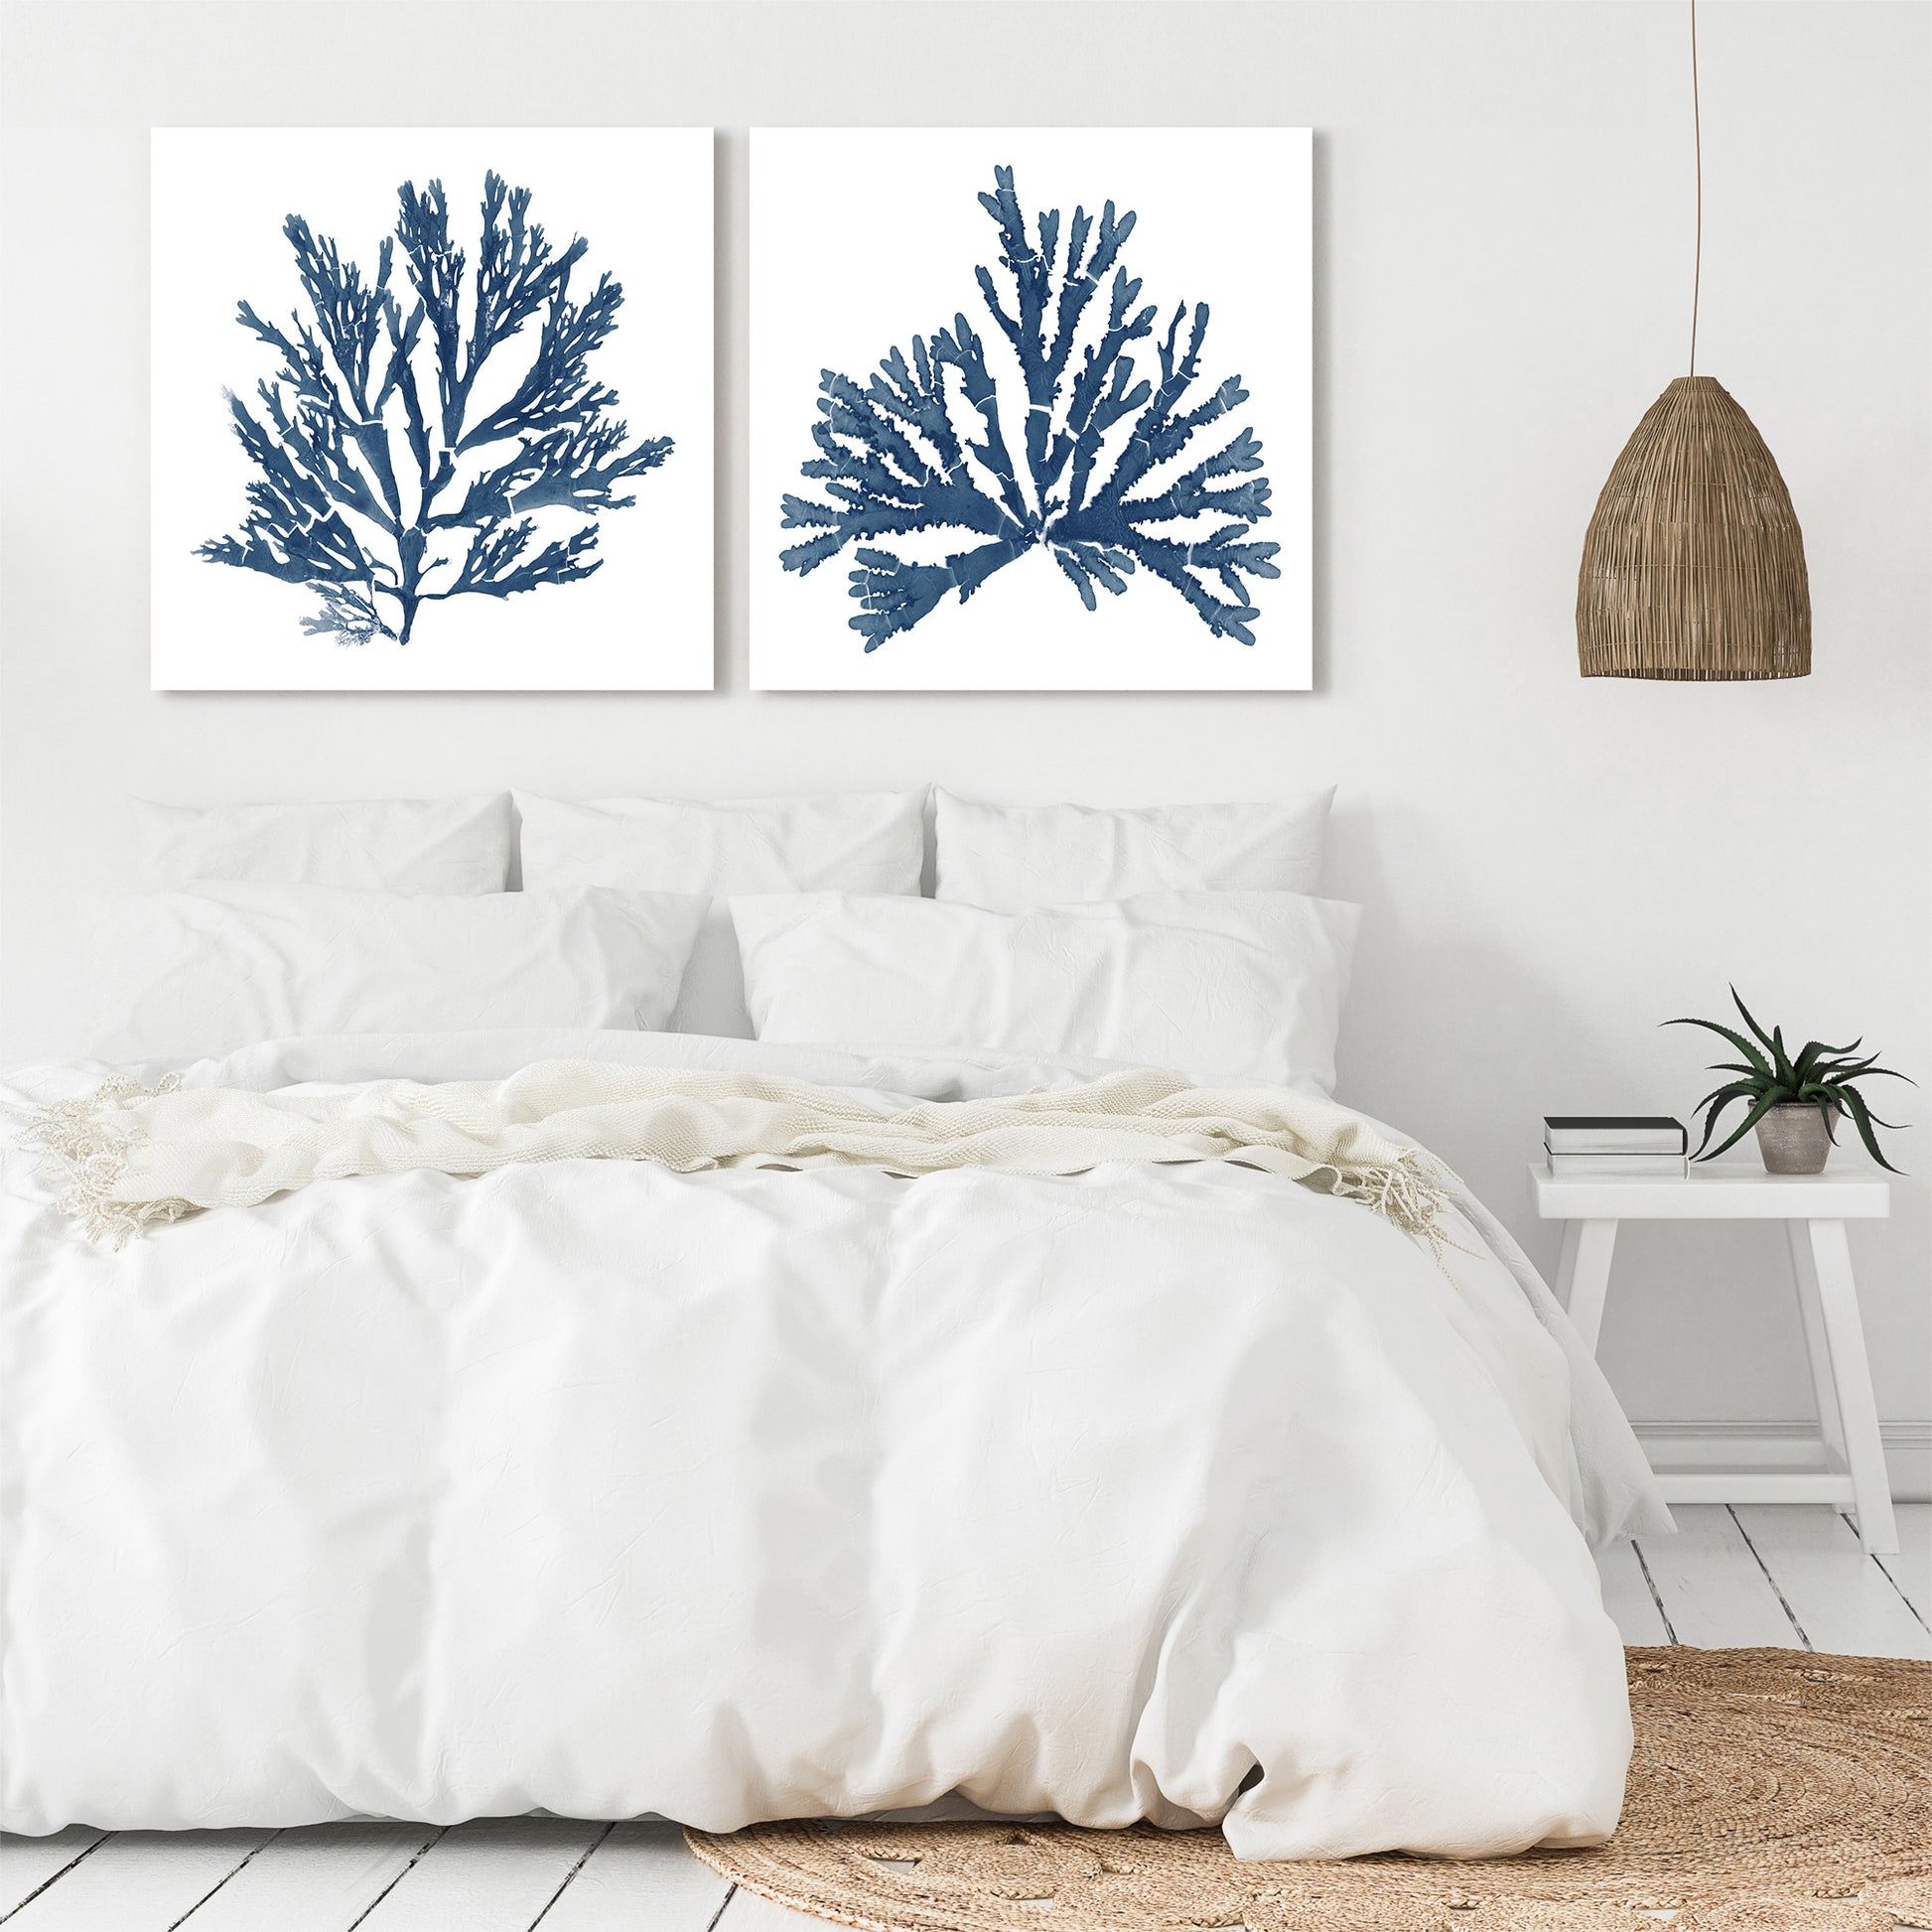 Pacific Sea Mosses Blue On White - 2 Piece Gallery Wrapped Canvas Set by Wild Apple Portfolio - Art Set - Americanflat